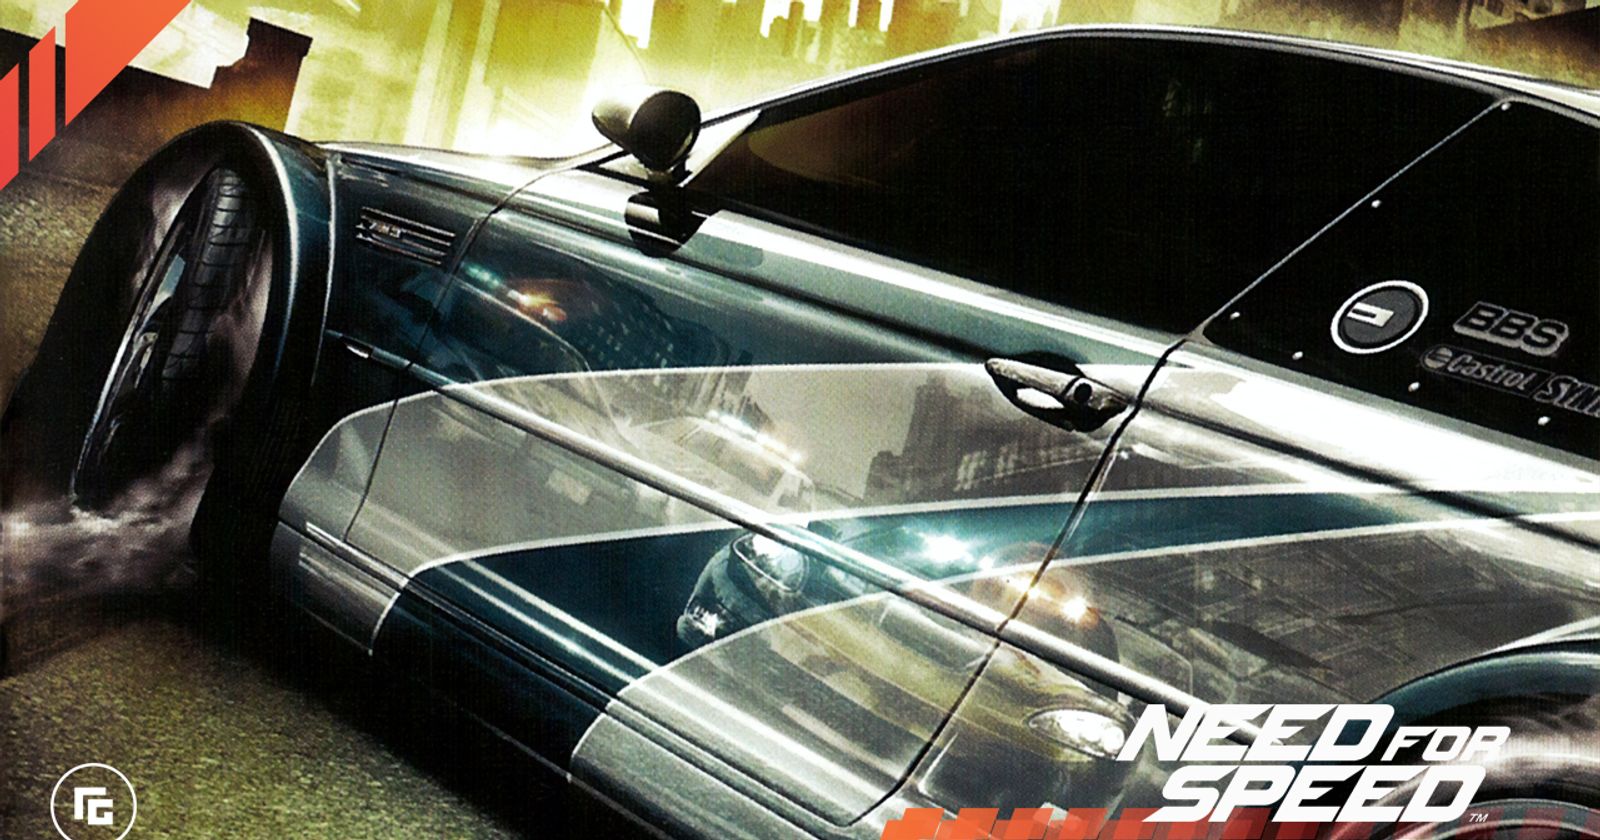 Fan-favourite Need For Speed remake accidentally confirmed early